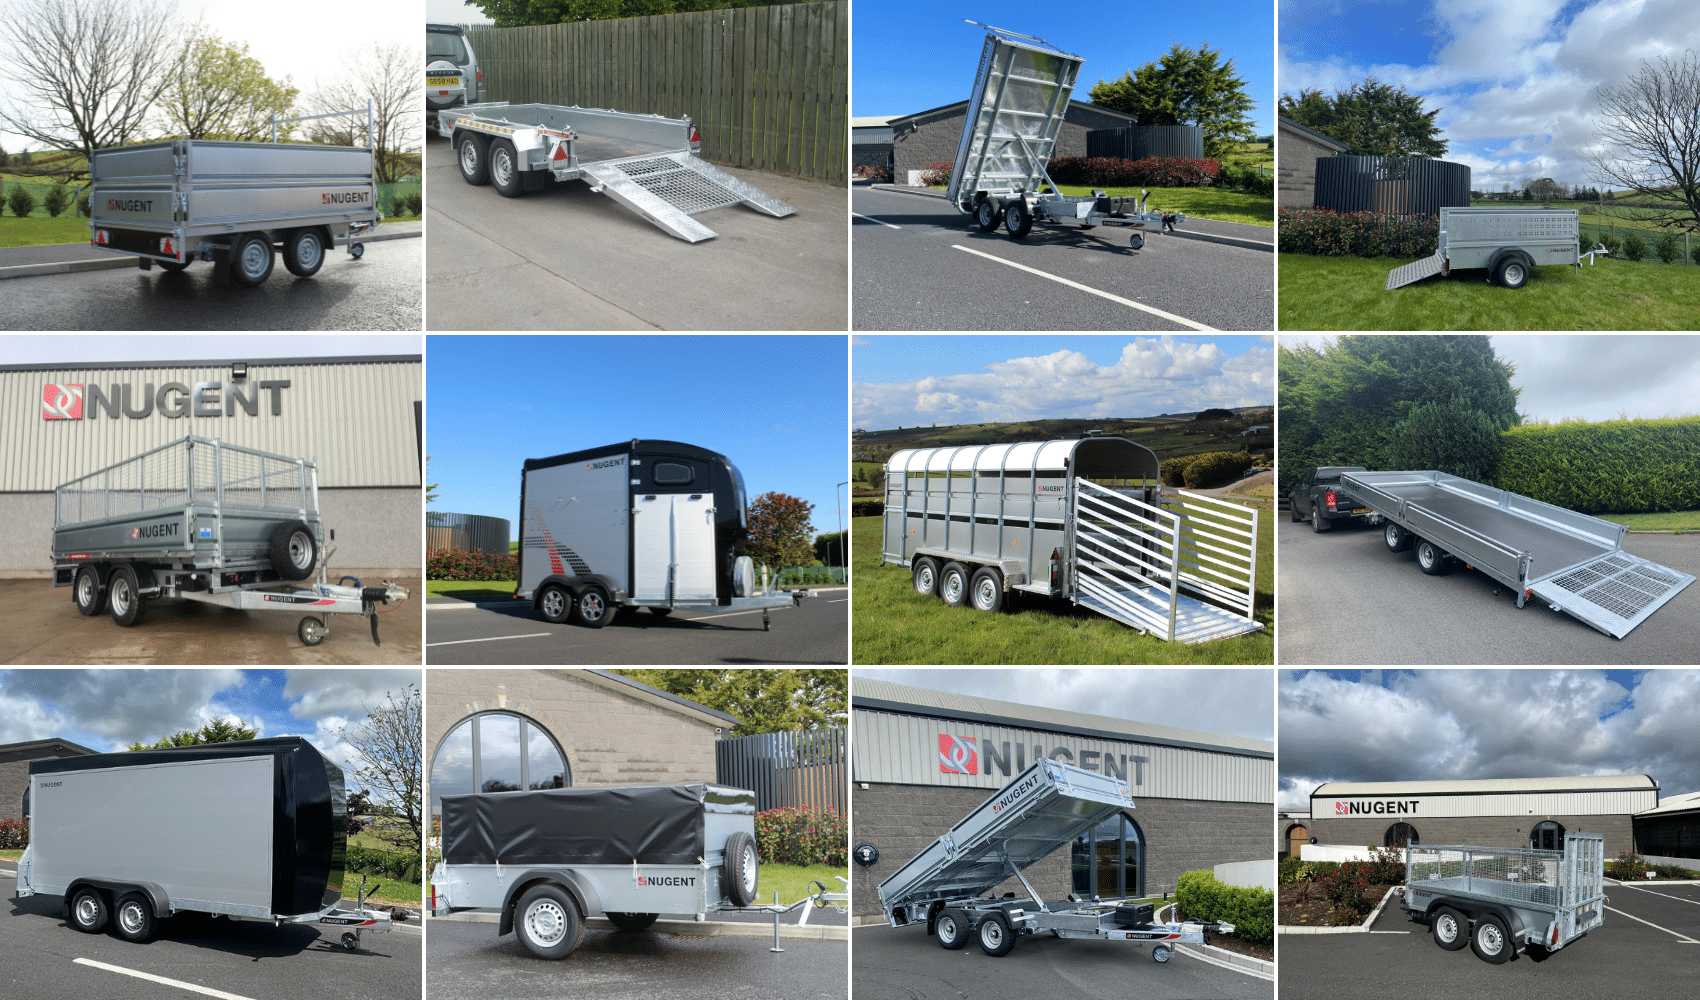 Nugent trailers for sale at Thurlow Nunn Standen dealers